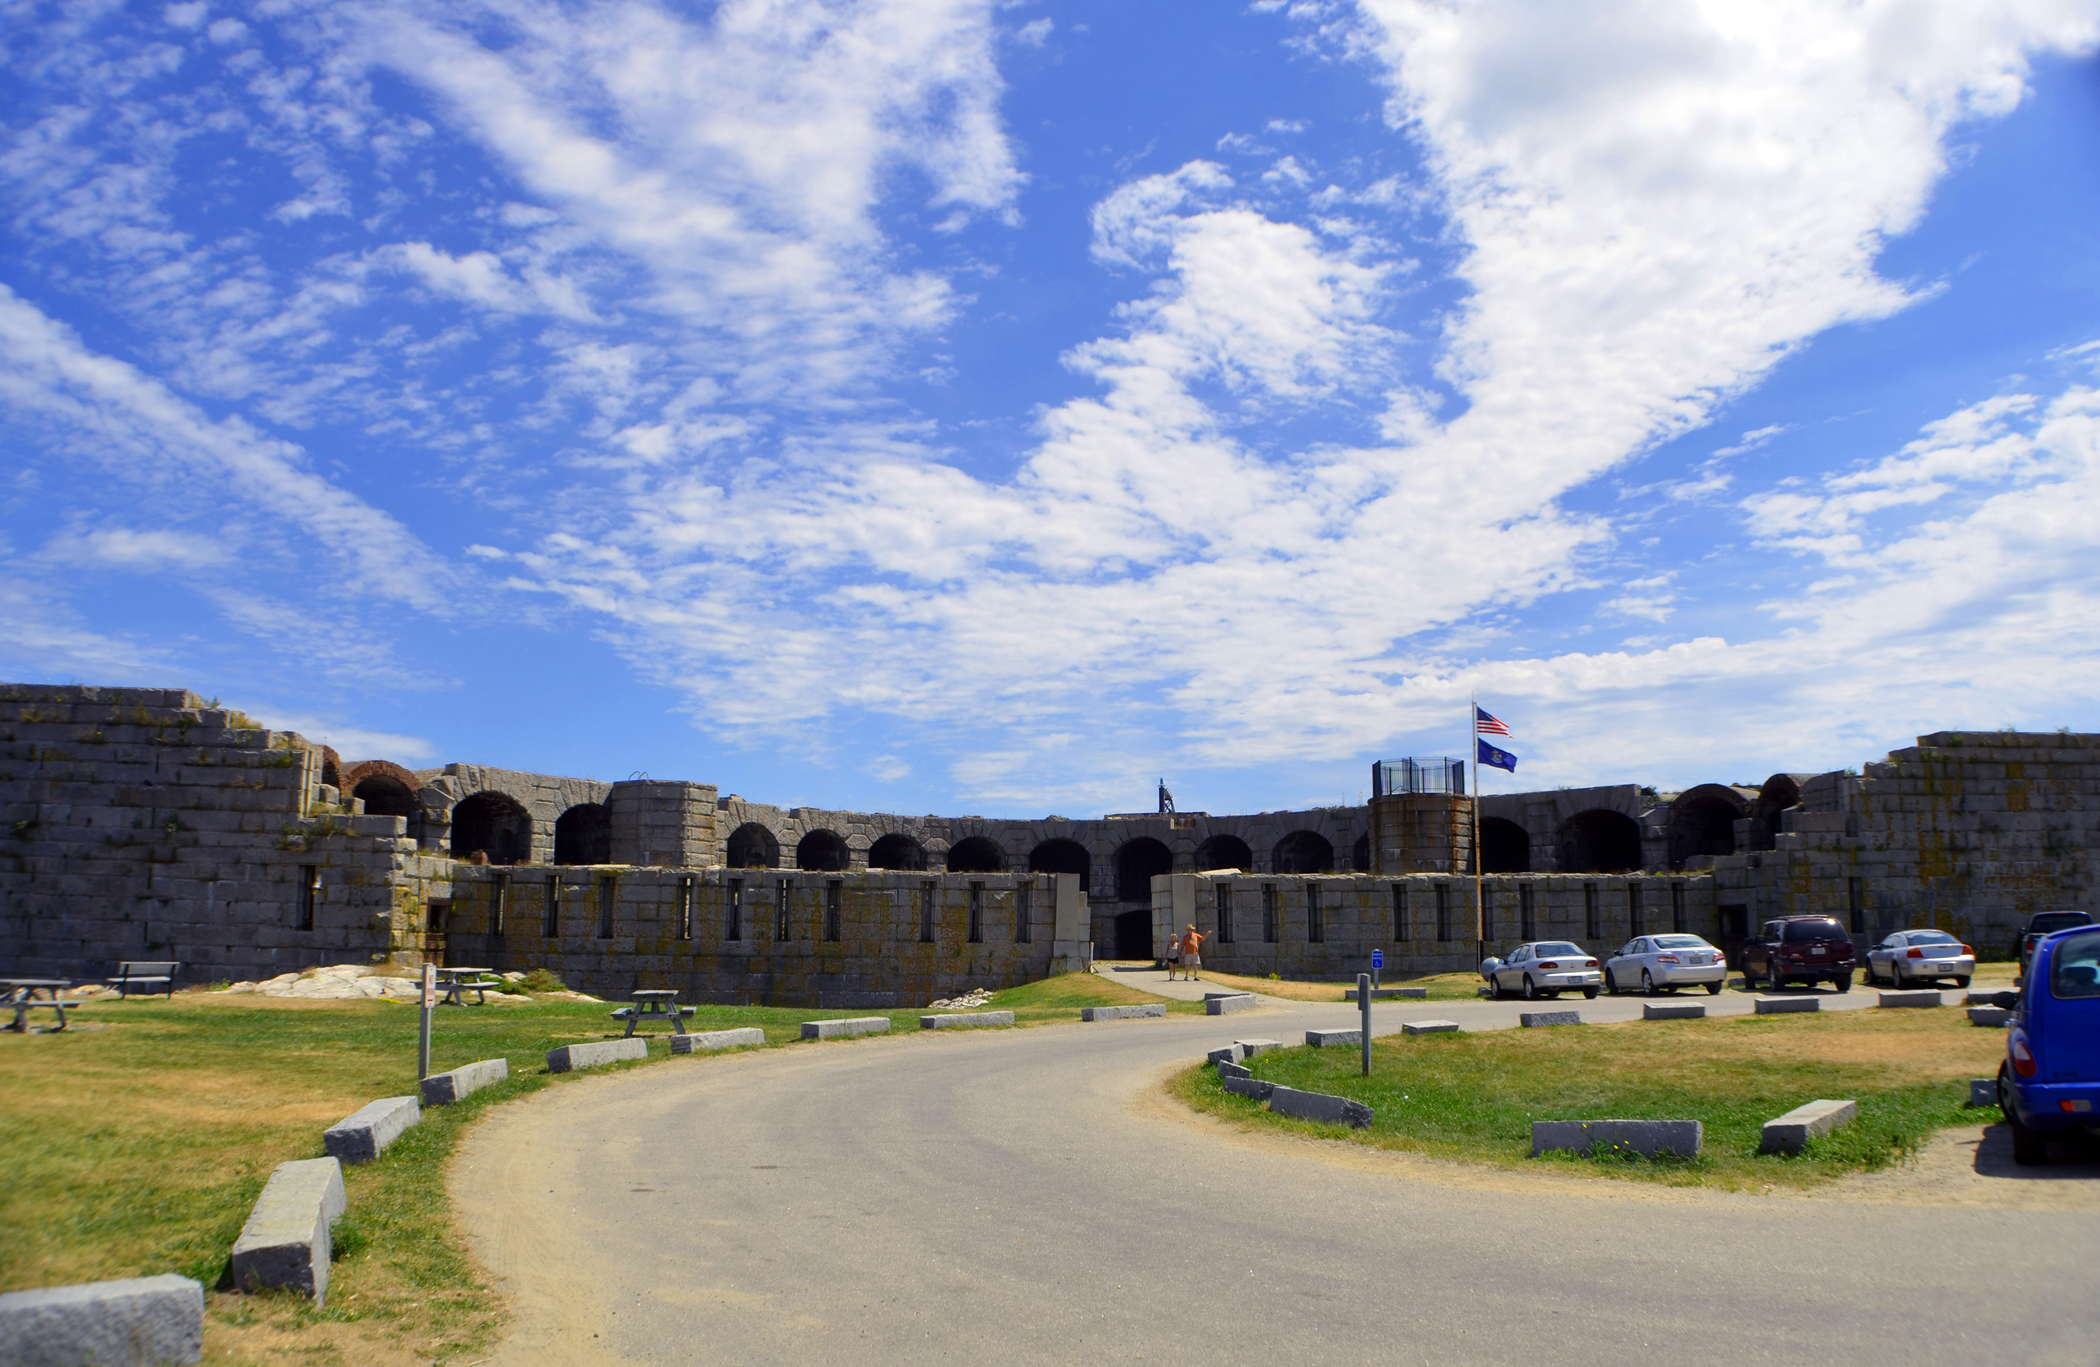 Exploring Fort Popham (user submitted)